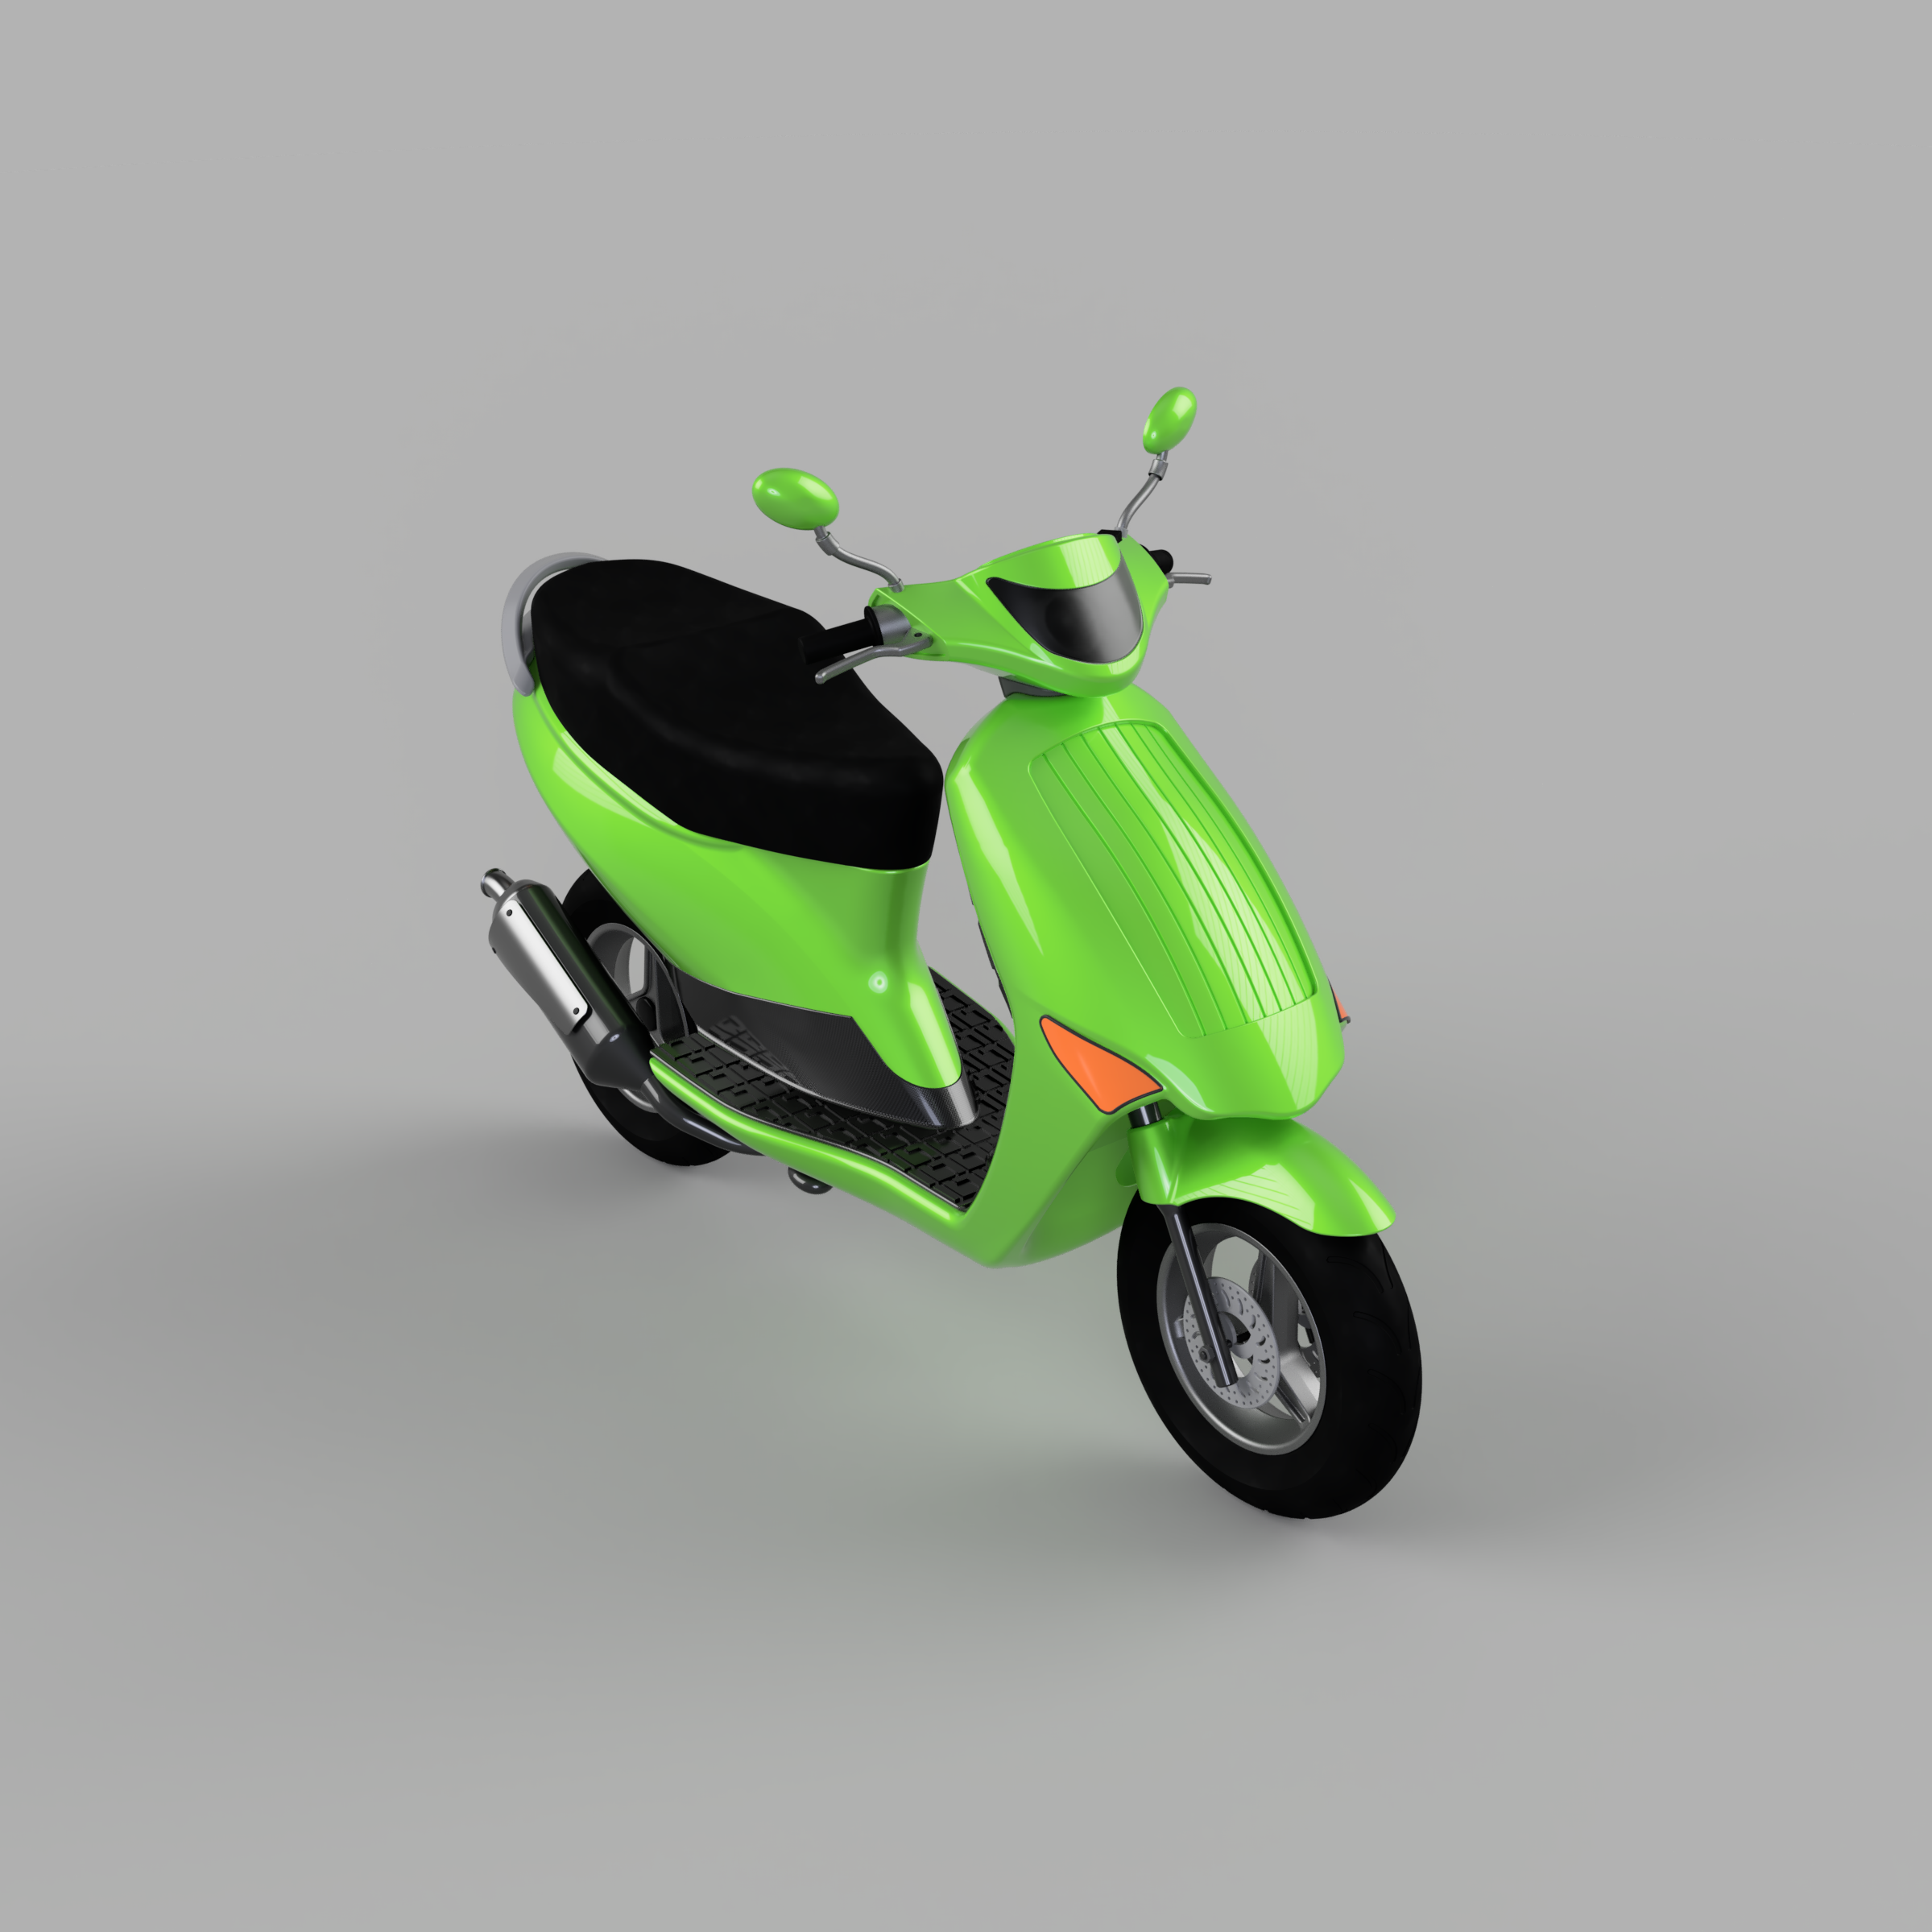 Scooter-3_2023-Jan-23_03-50-05PM-000_CustomizedView2683232164